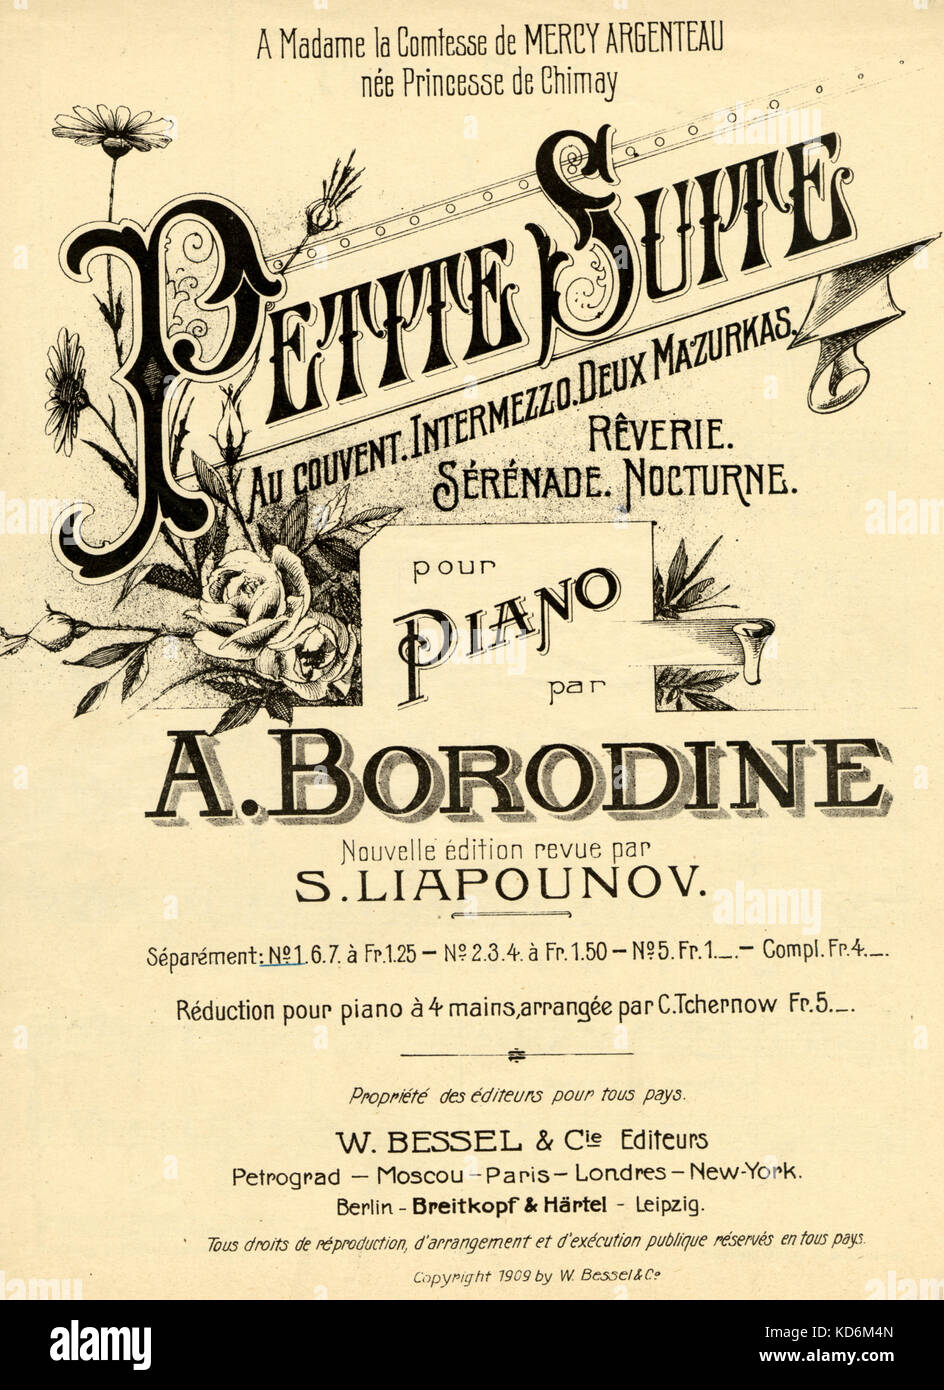 Score cover of Alexander Borodin's ' Petite Suite Au Couvent Intermezzo Deux Mazurkas ' for piano reviewed by Sergei Liapunov. Russian composer & chemist, born 12 November 1833 died 27 February 1887. Published W. Bessel & Co., 1910. Stock Photo